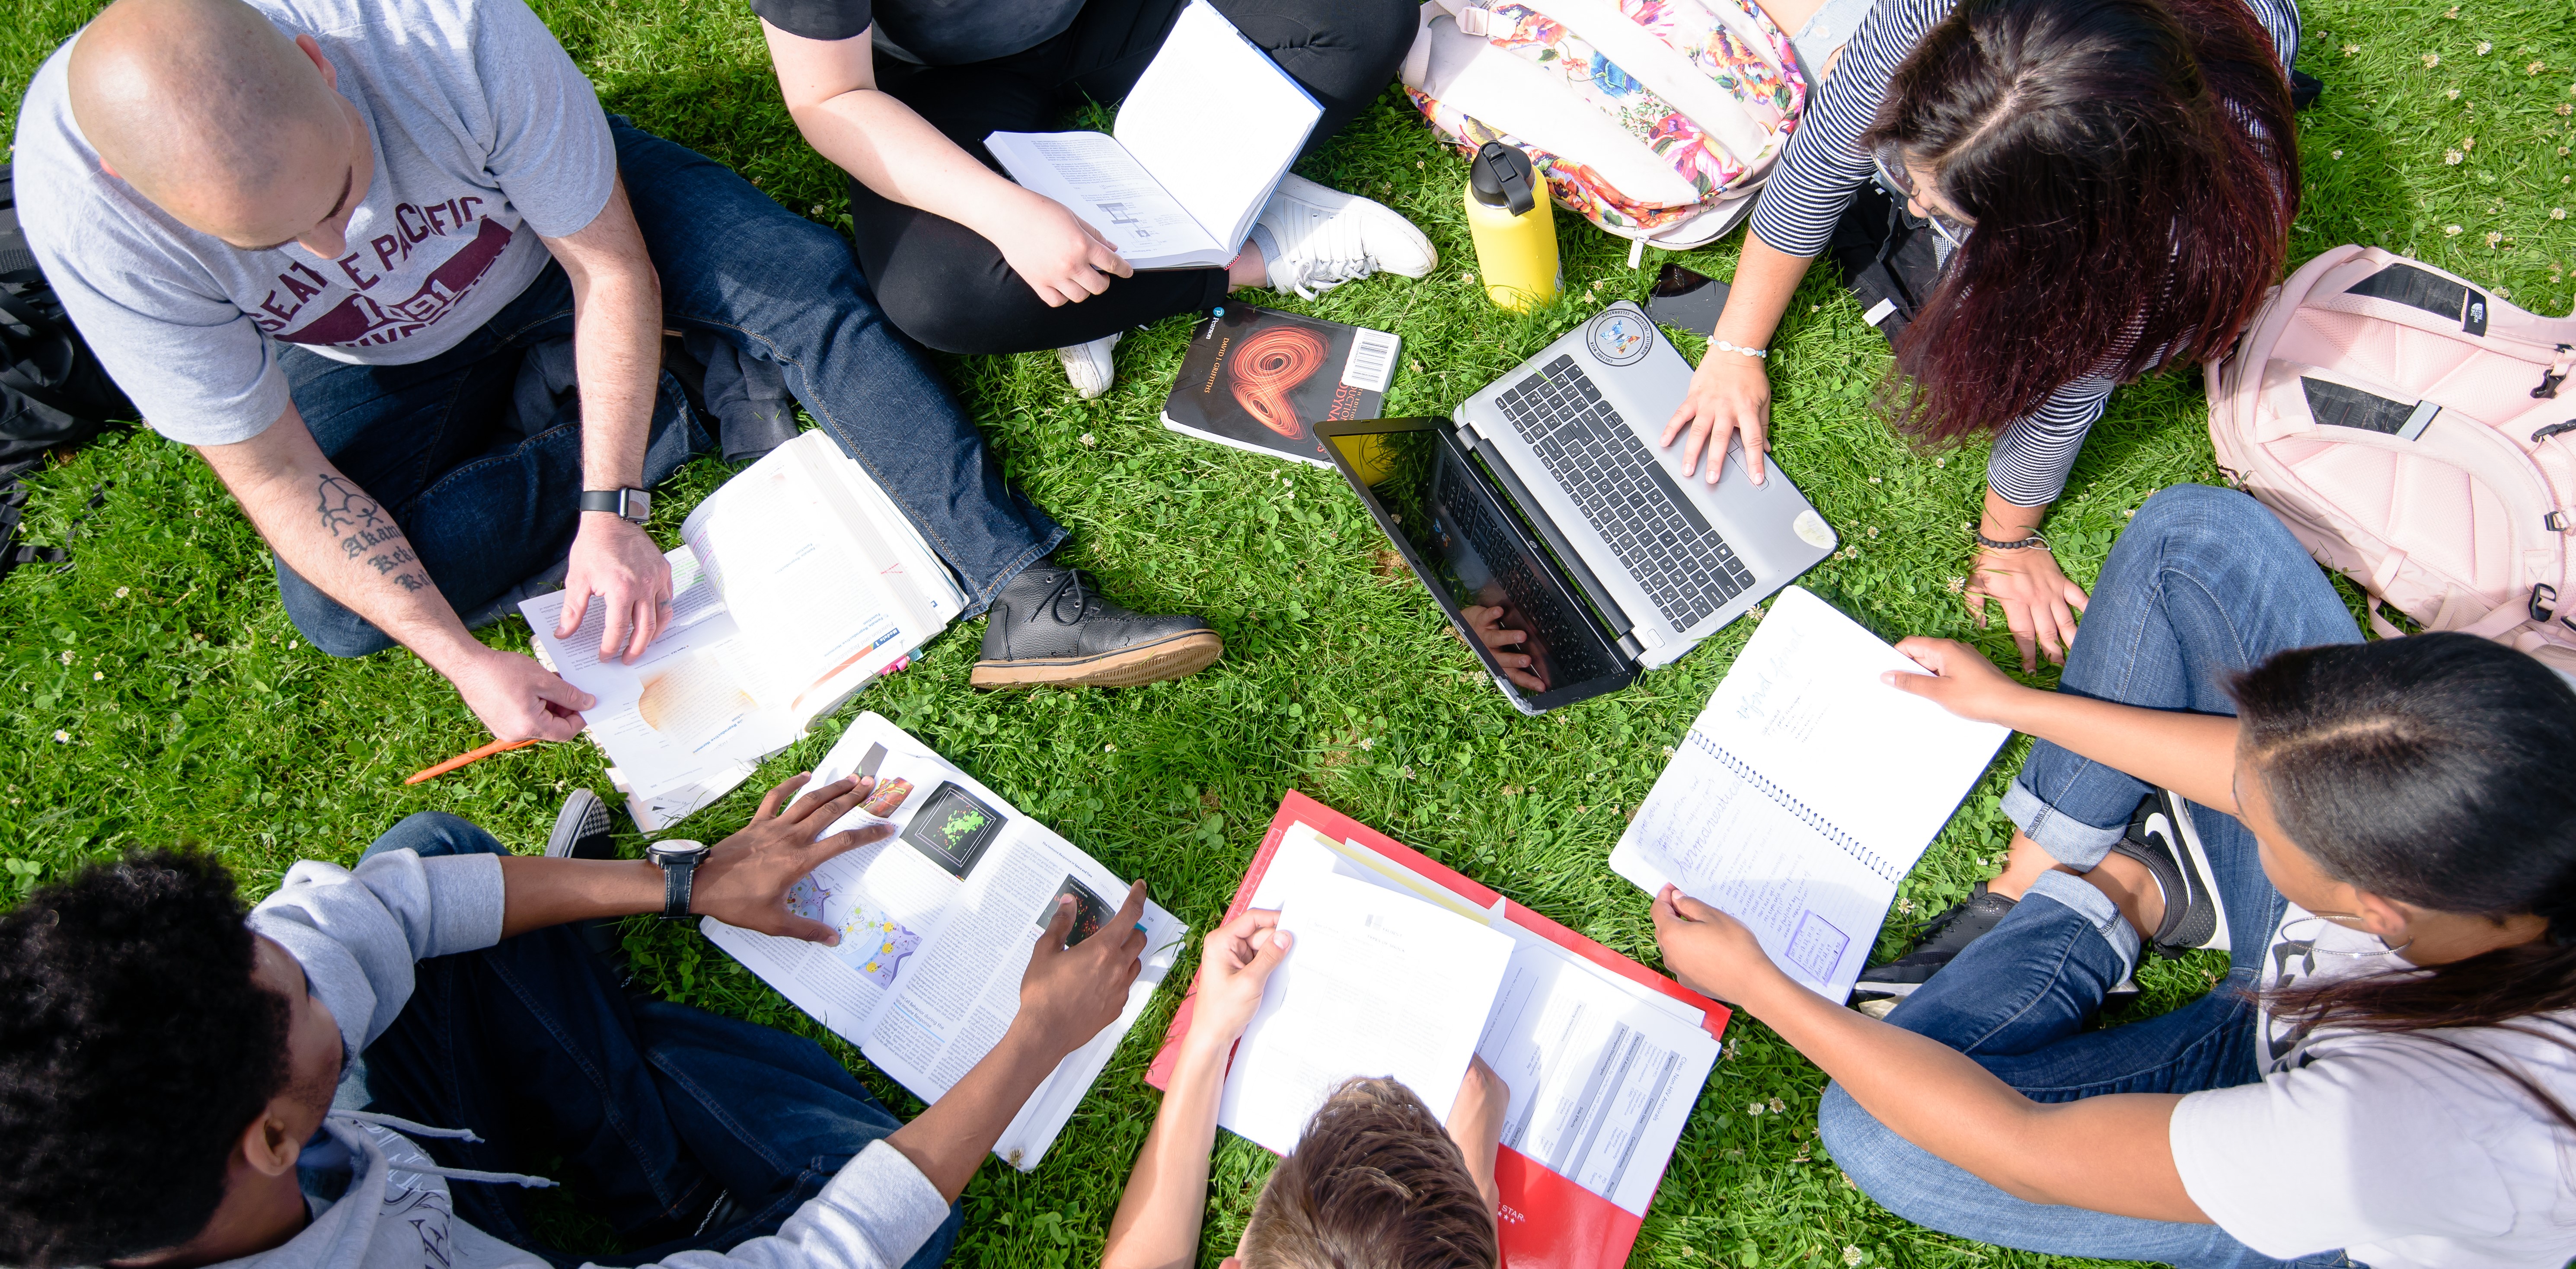 Six students studying in the grass.